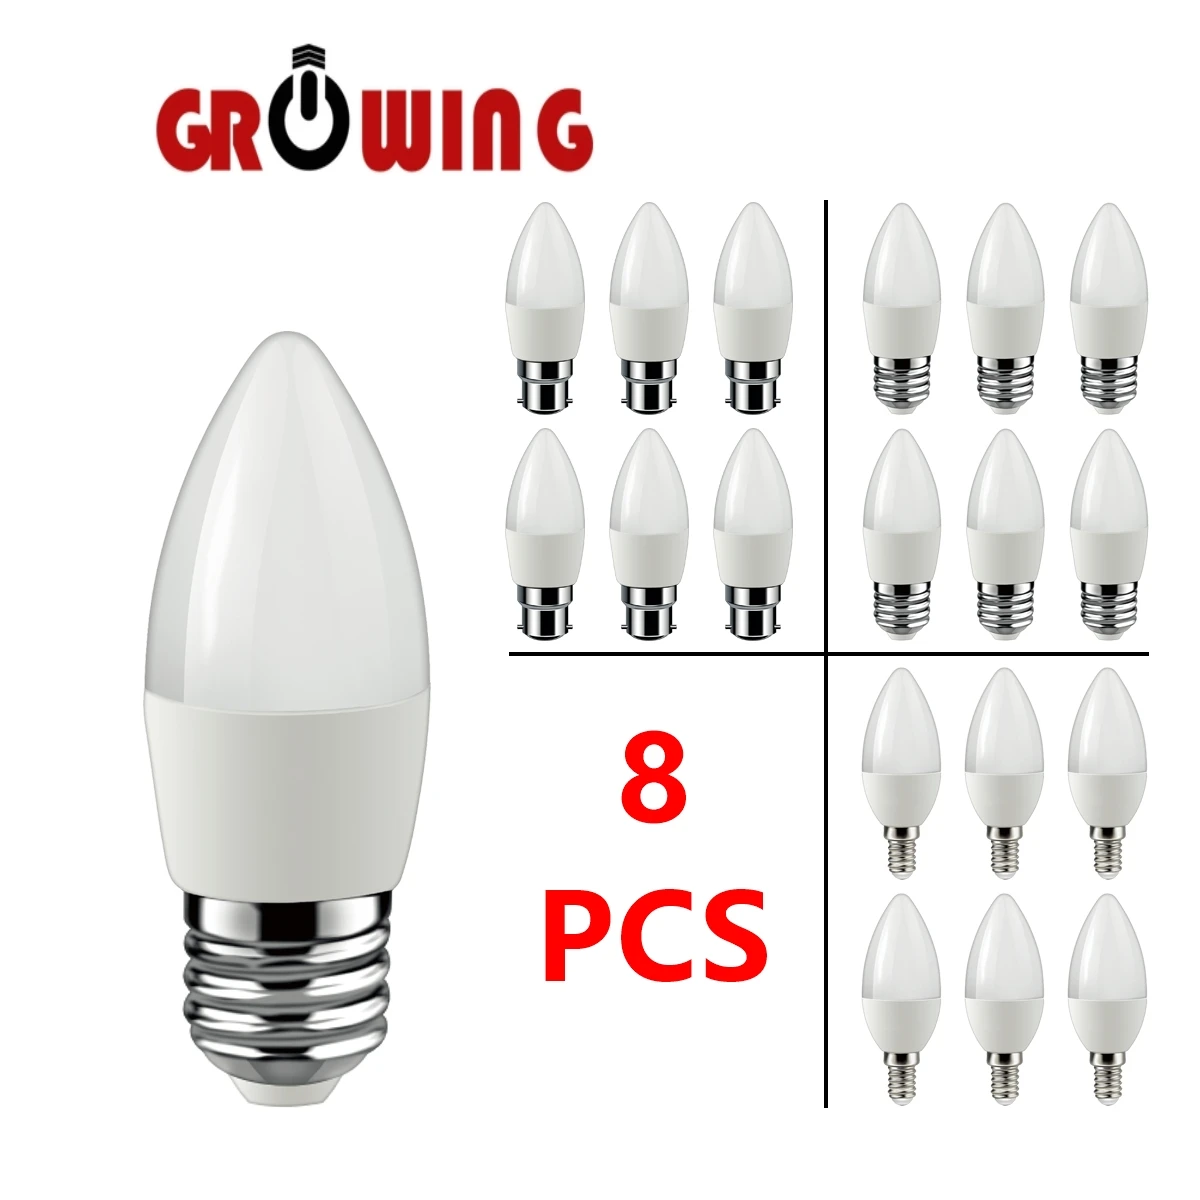 8PCS LED candle lamp C37 220V 3W-7W E14 E27 B22 High light efficiency strobe free for crystal lamp kitchen study